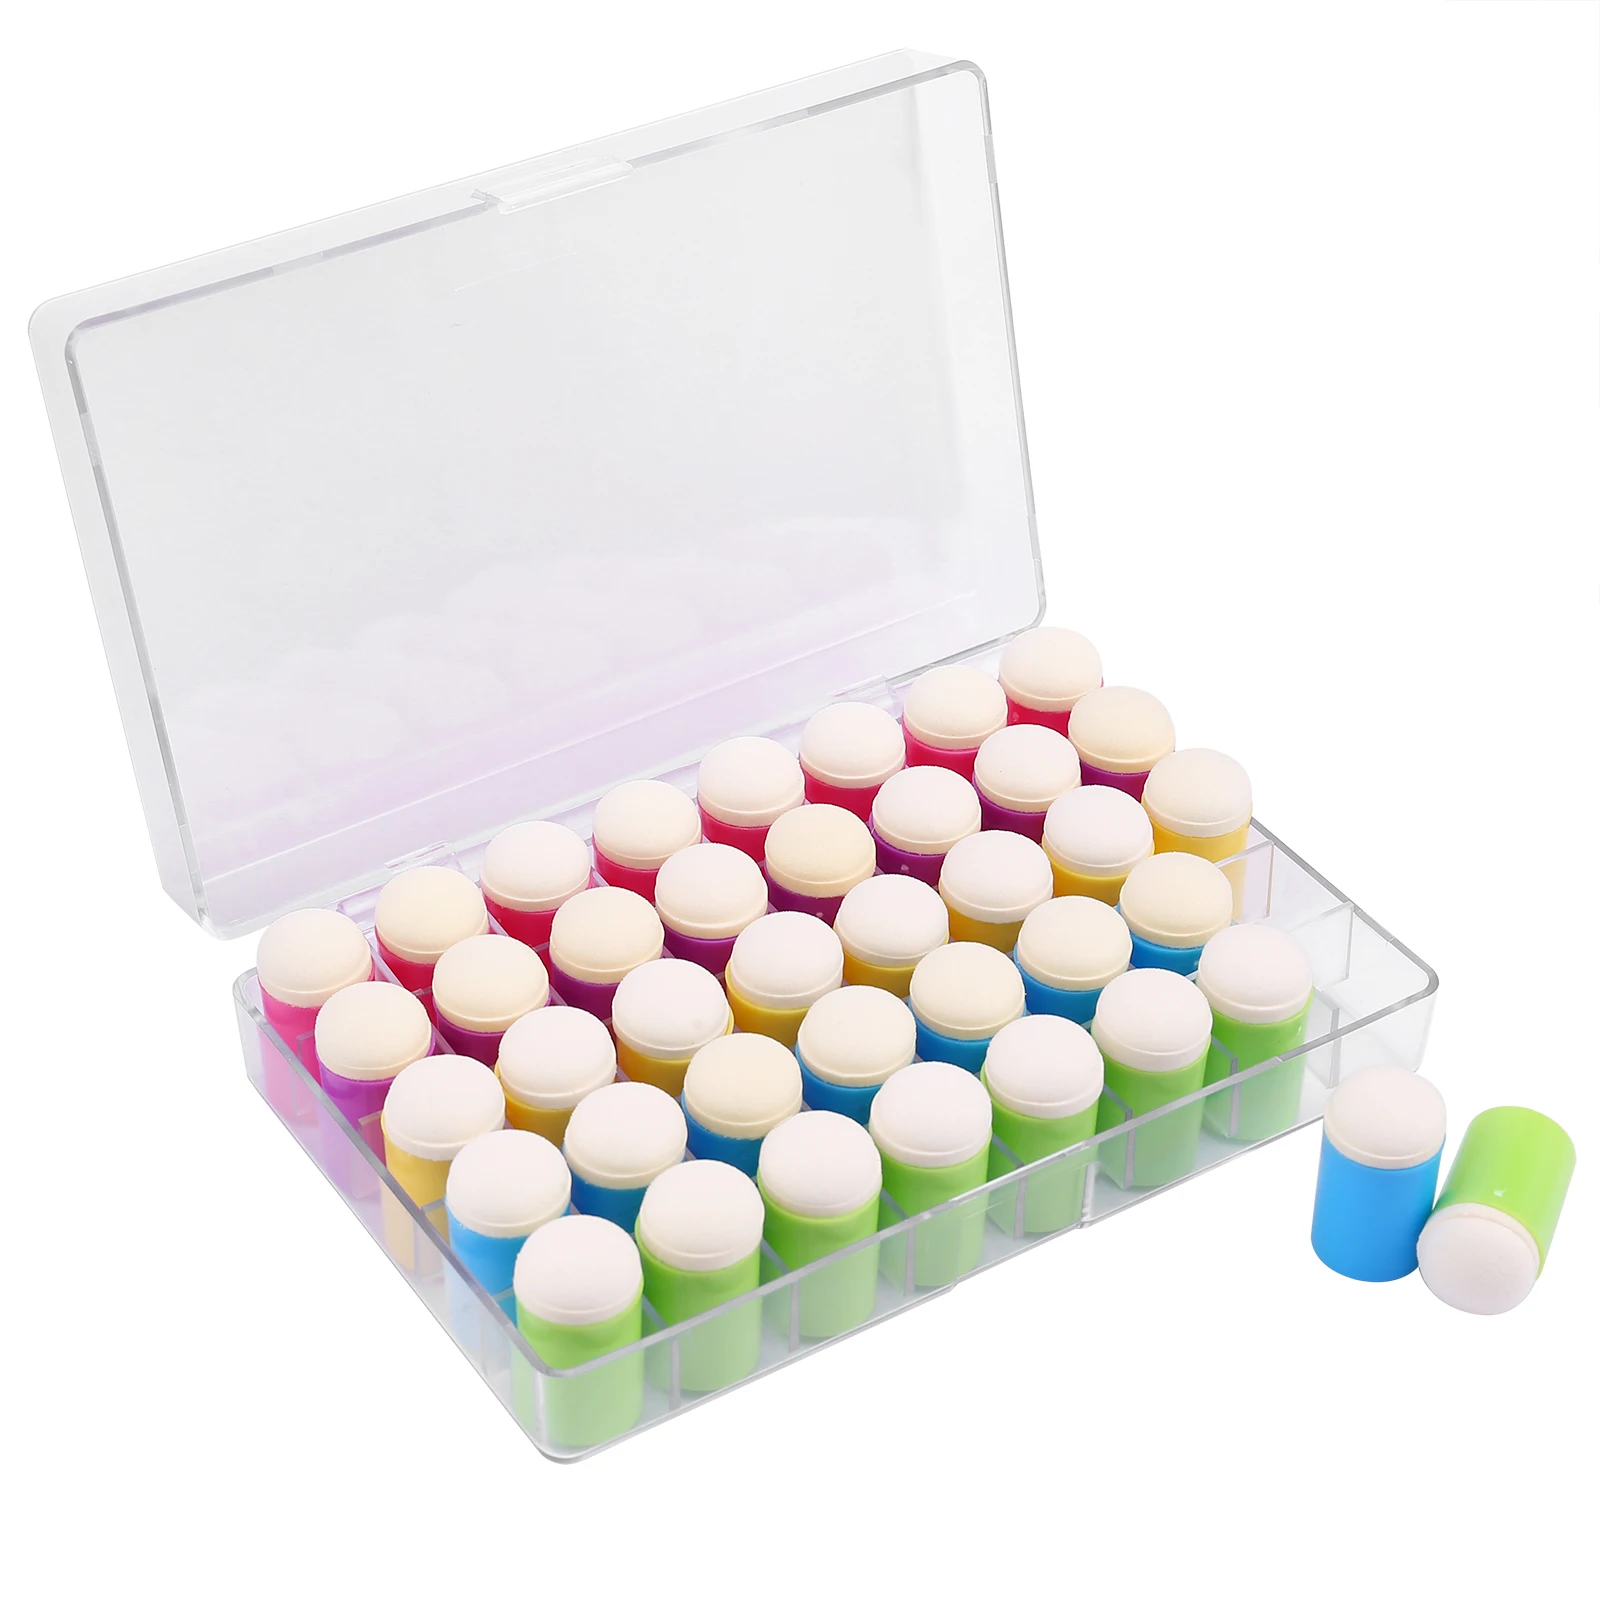 

40PCS Finger Sponge Daubers with Storage Box for Ink Transferring, Painting, Drawing, Card Making